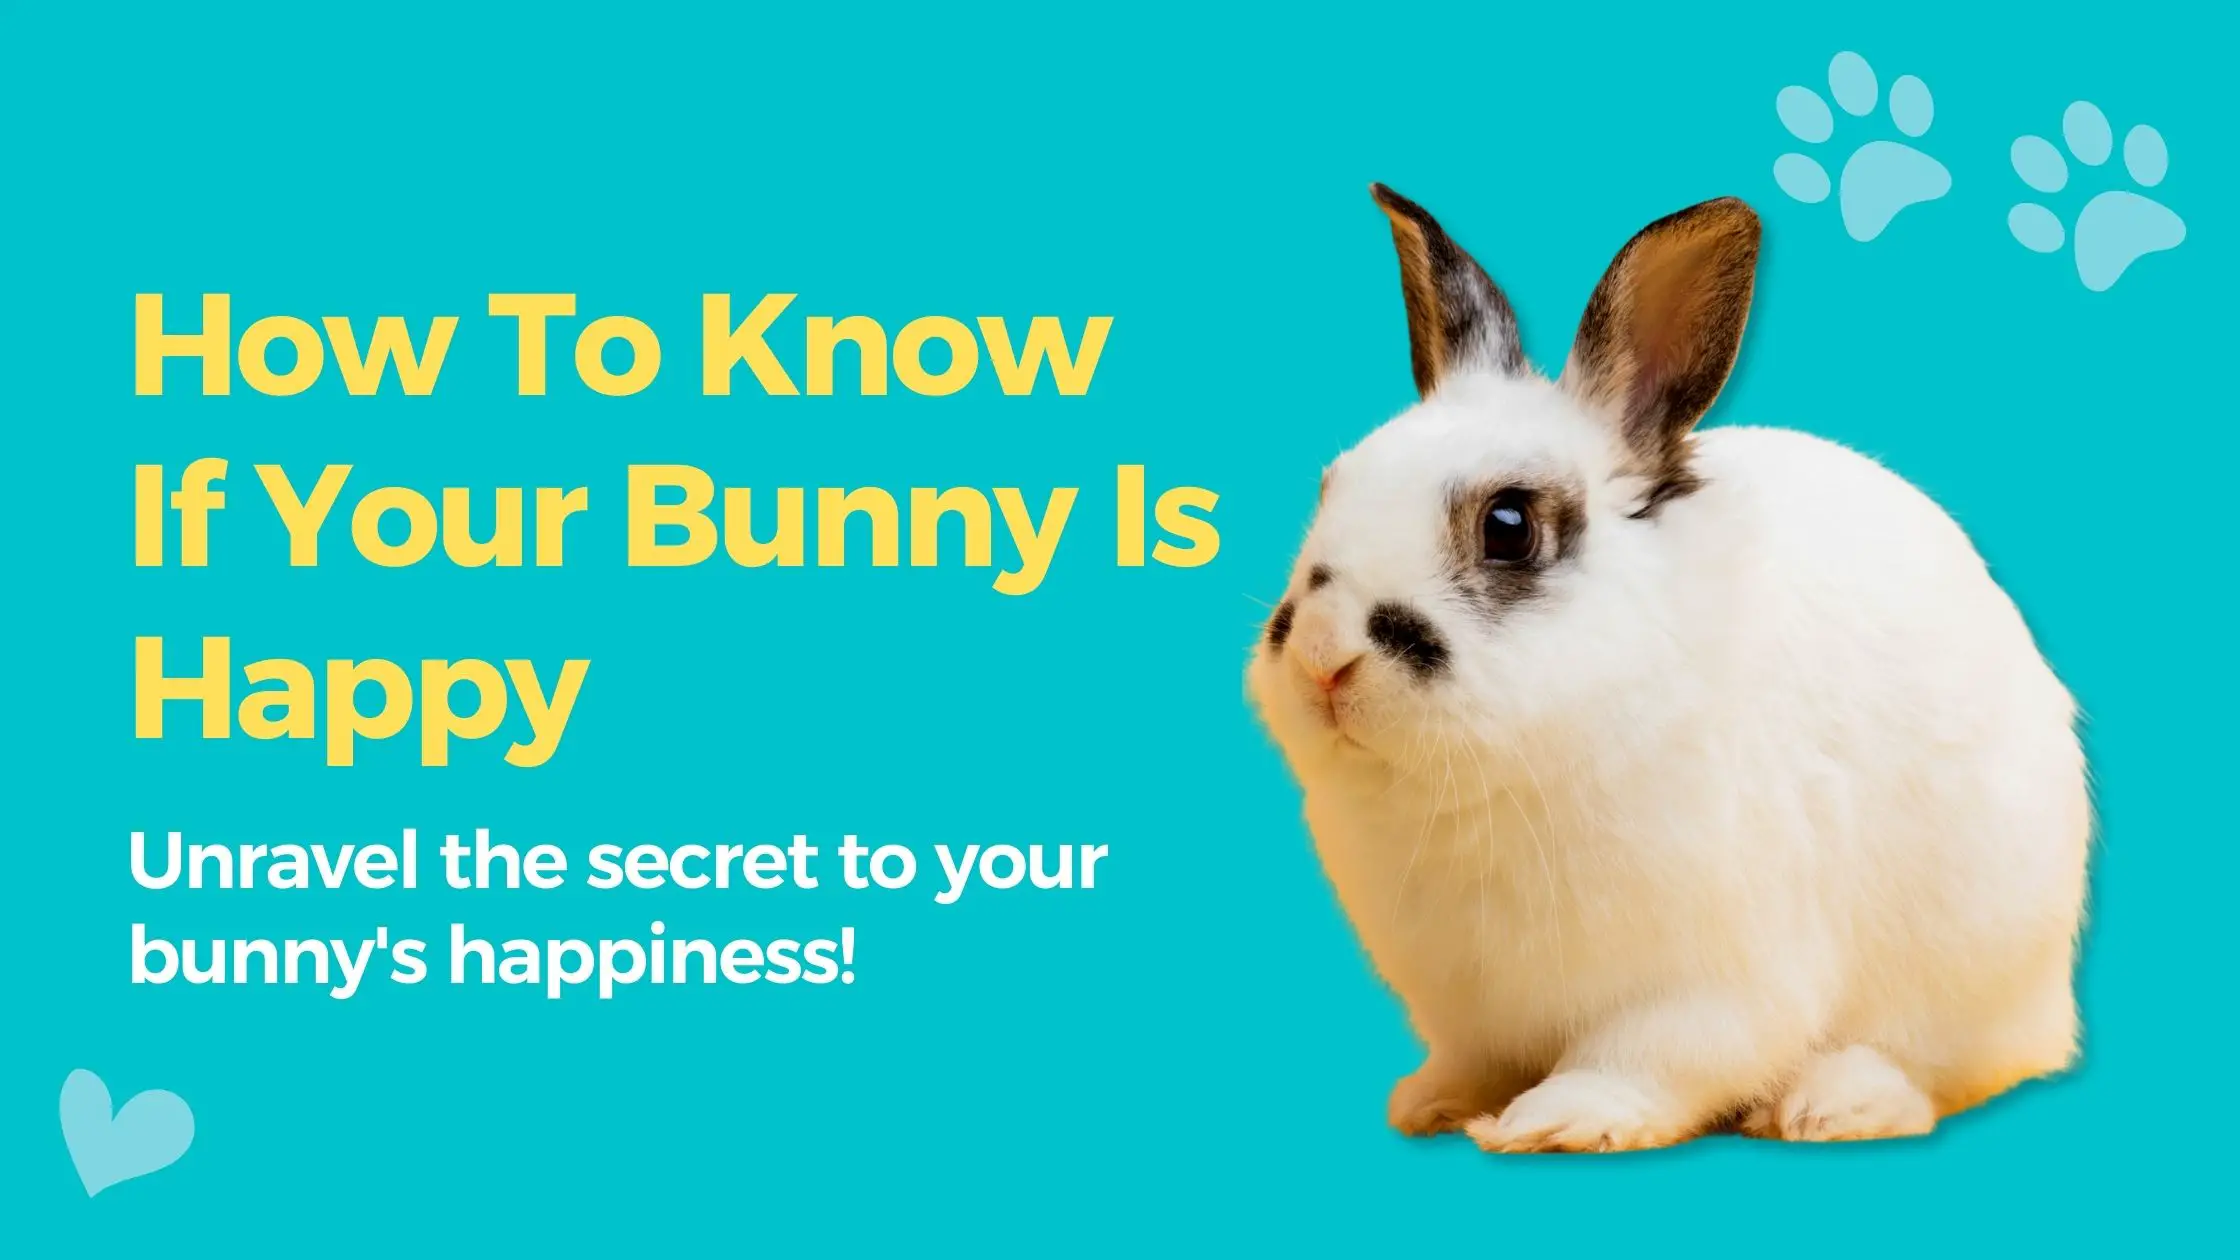 How To Know If Your Bunny Is Happy